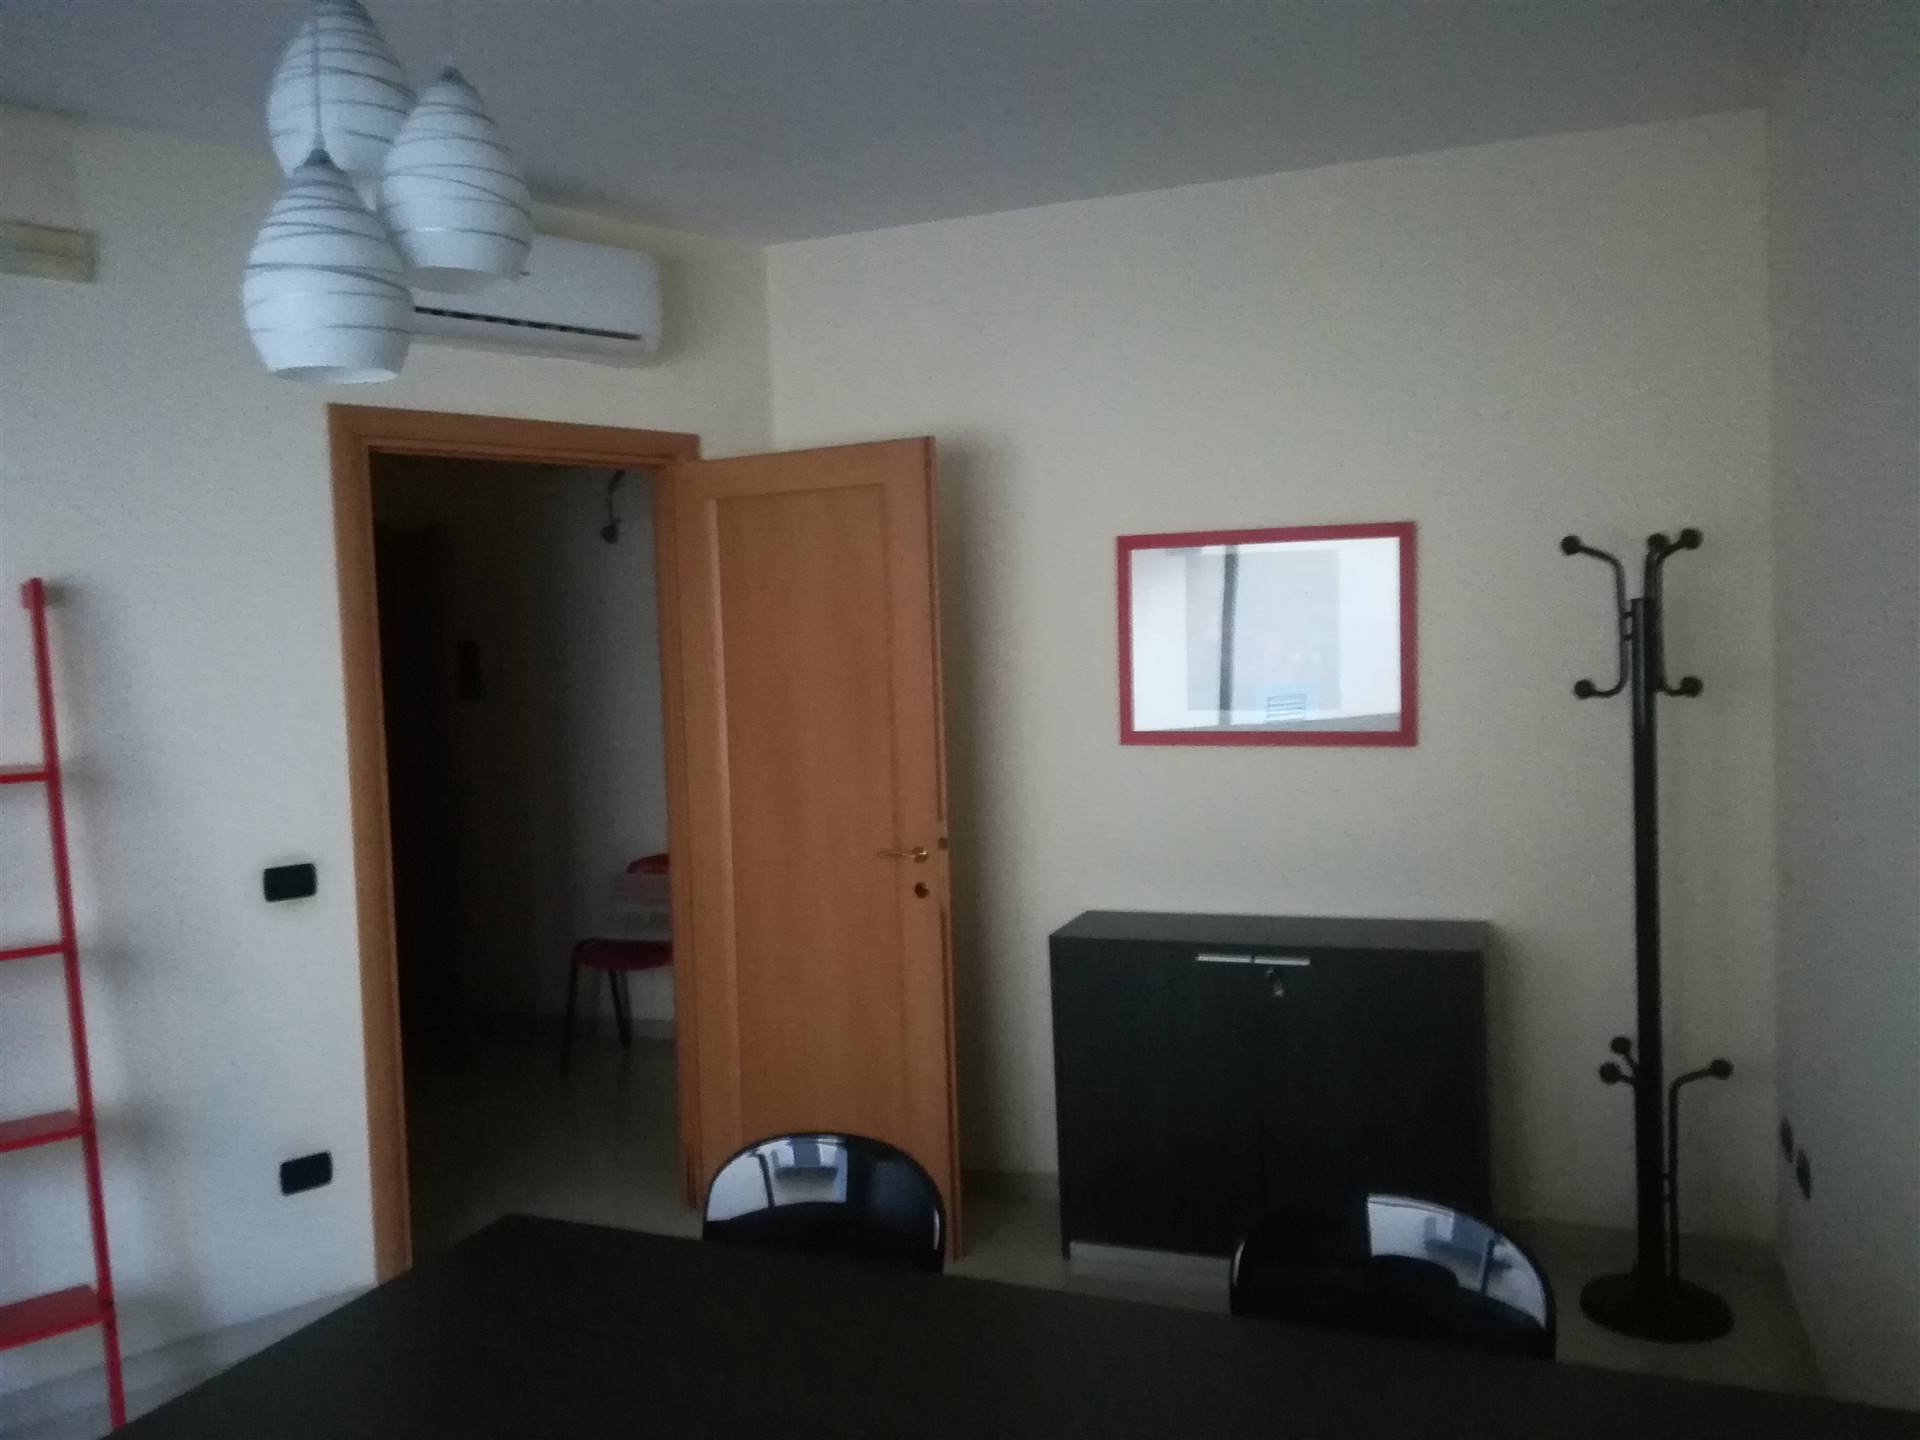 CENTRO, LICATA, Apartment for rent of 42 Sq. mt., Good condition, Energetic class: G, placed at 1°, composed by: 2 Rooms, 2 Bedrooms, 1 Bathroom, 